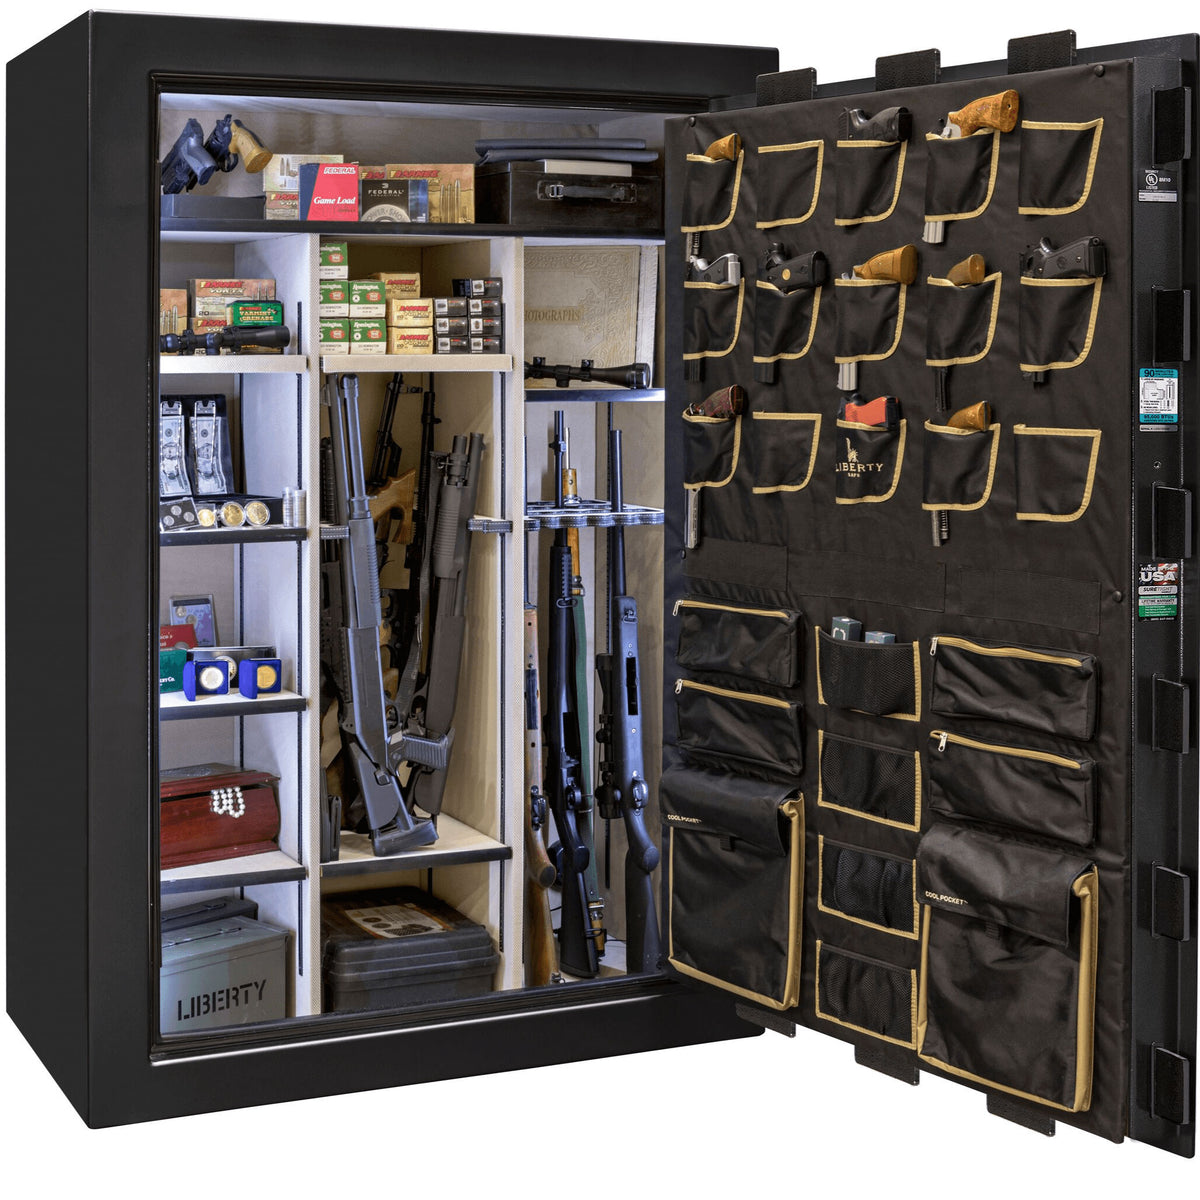 Liberty Classic Select Extreme Wide Body Safe in Black Gloss, open.